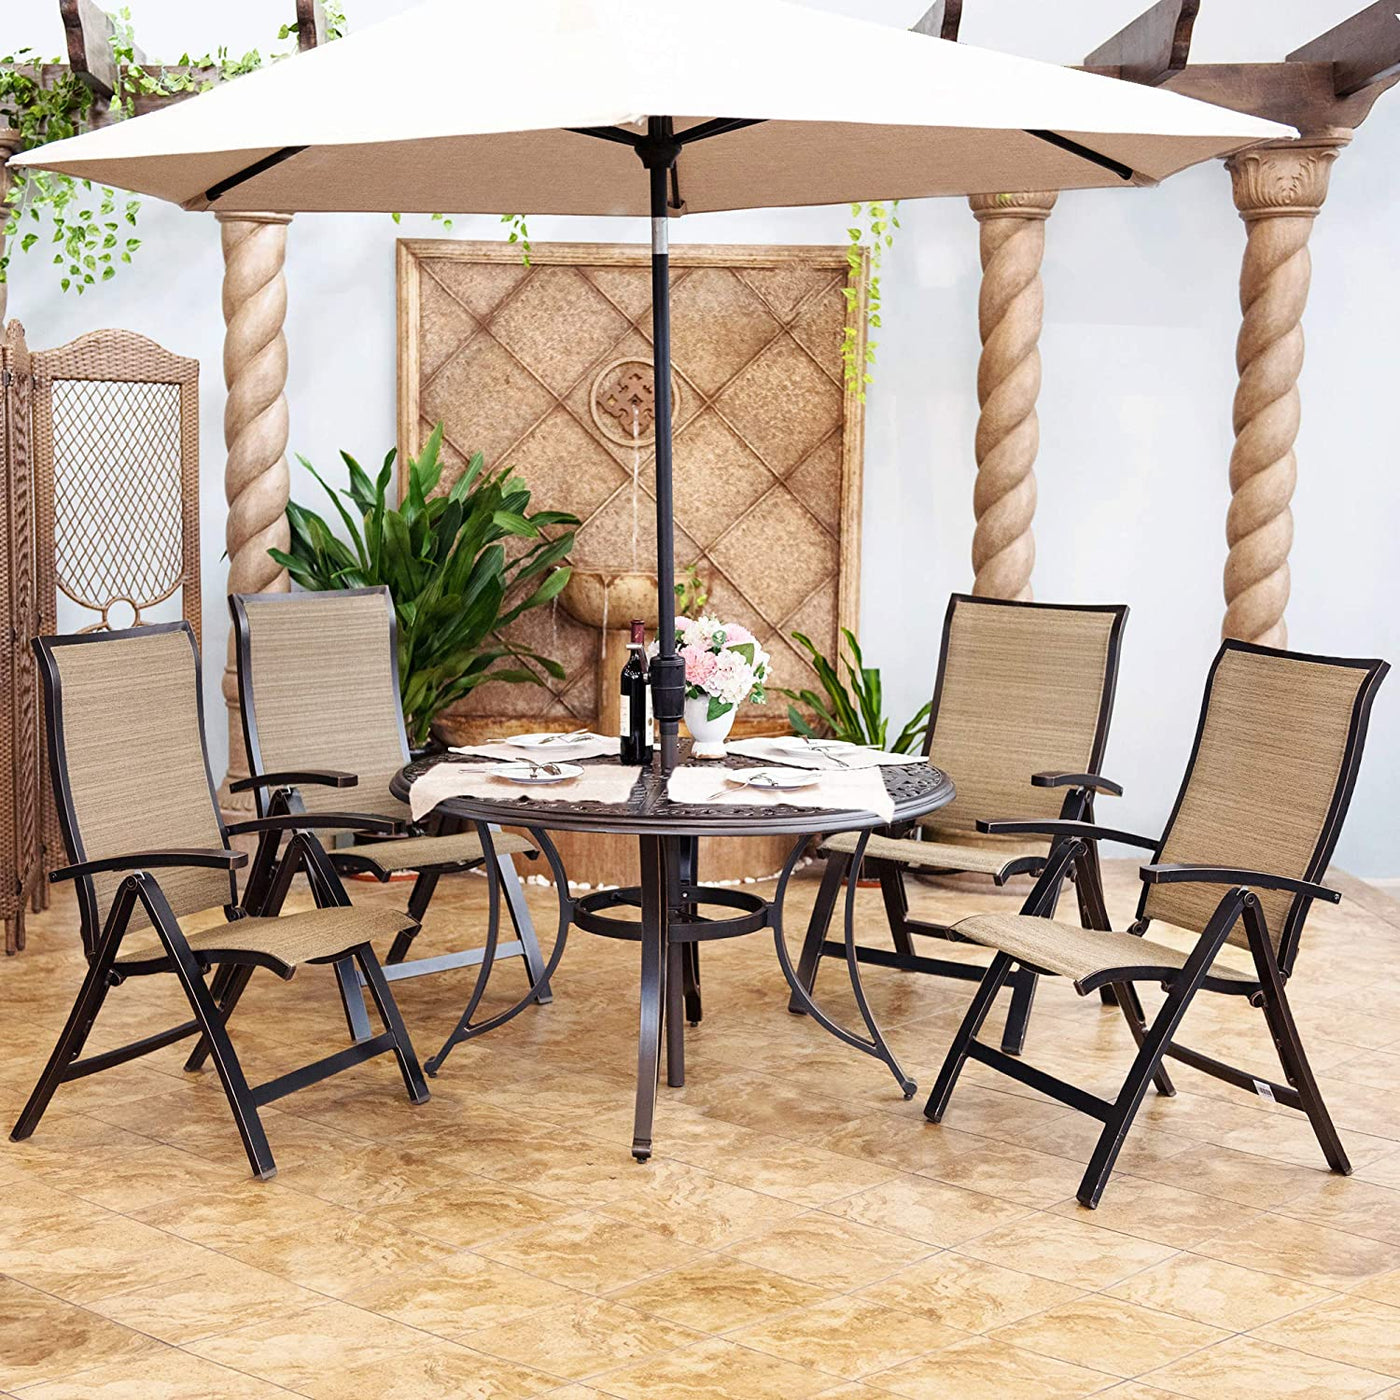 Outdoor Patio Garden Furniture 48" Round Table with Folding Chairs Set of 5